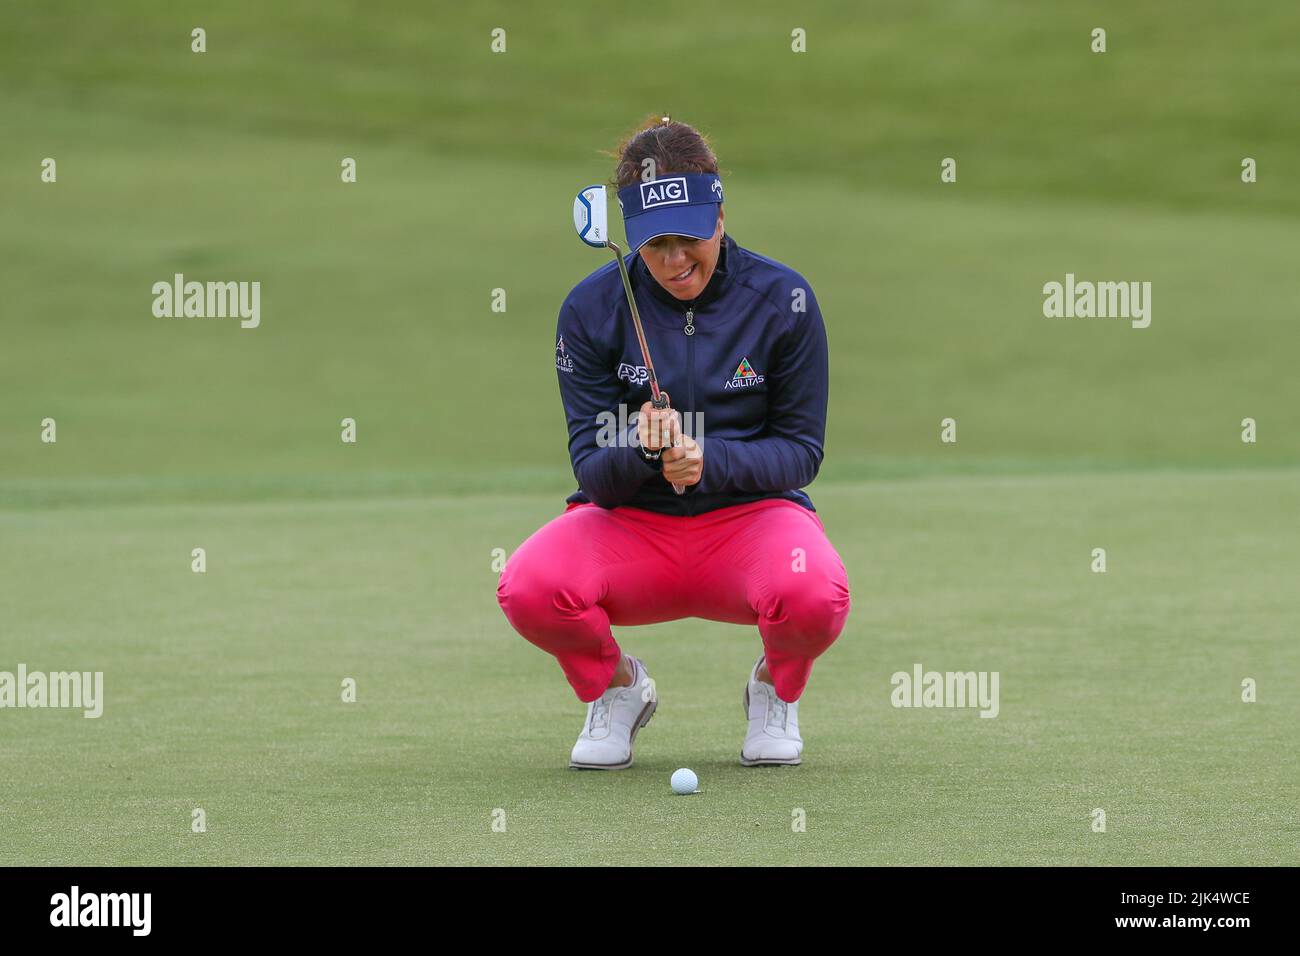 Irvine, UK. 30th July, 2022. The third round of the Trust Golf Women's Scottish Golf took place with 75 players making the cut. Heavy overnight rain from Friday into Saturday made for a softer and more testing course. Georgia Hall lining up her putt on the second green. Credit: Findlay/Alamy Live News Stock Photo